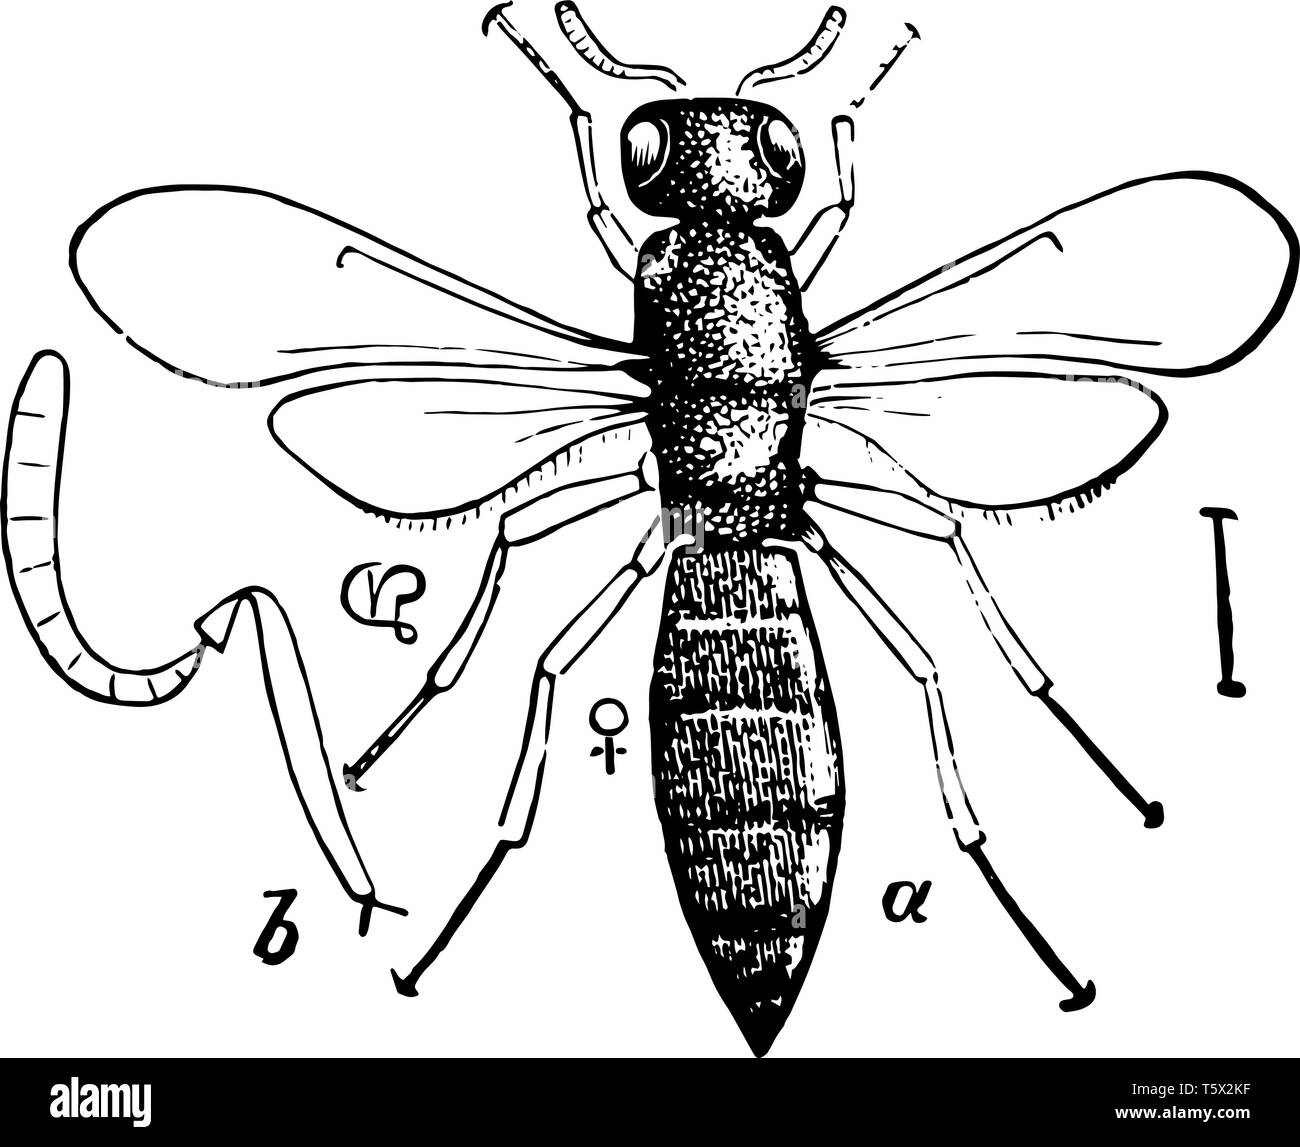 Scelio is a genus of parasitic insects of the Proctotrypidae family vintage line drawing or engraving illustration. Stock Vector